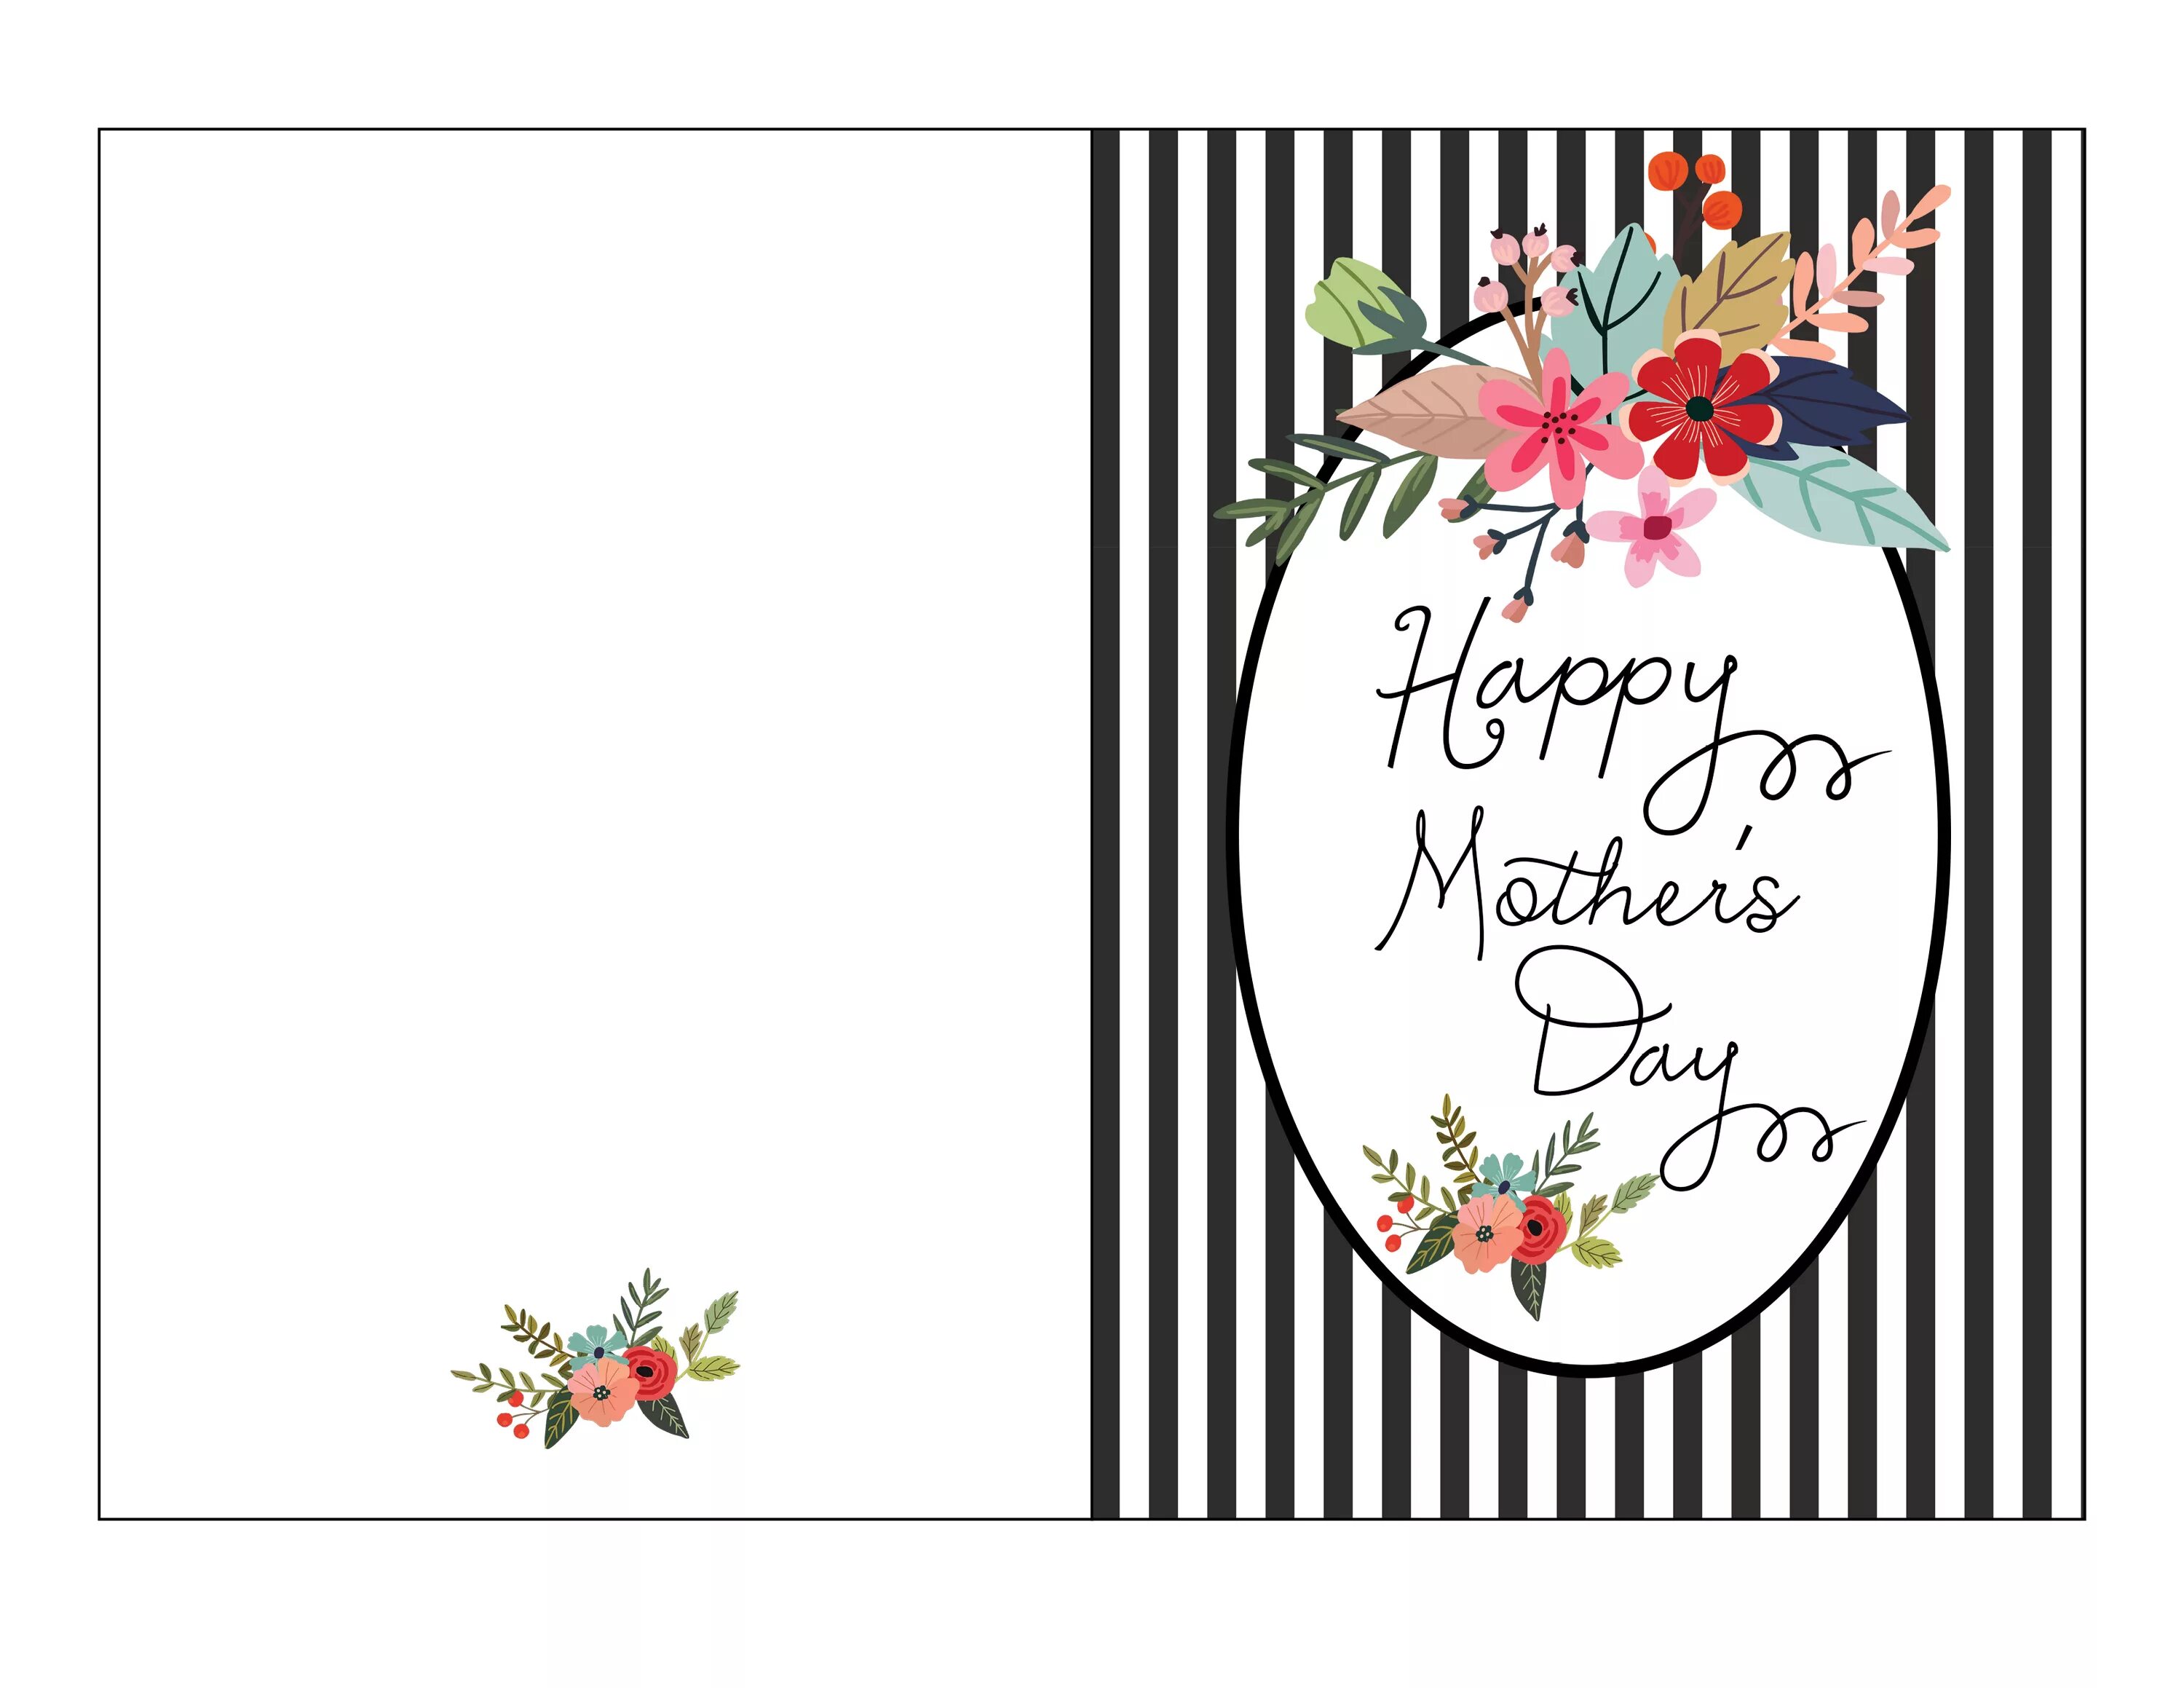 Printable cards. Mother`s Day Card. Mothers Day дизайн открыток. Card for mother's Day. Happy mothers Day открытка карточка.